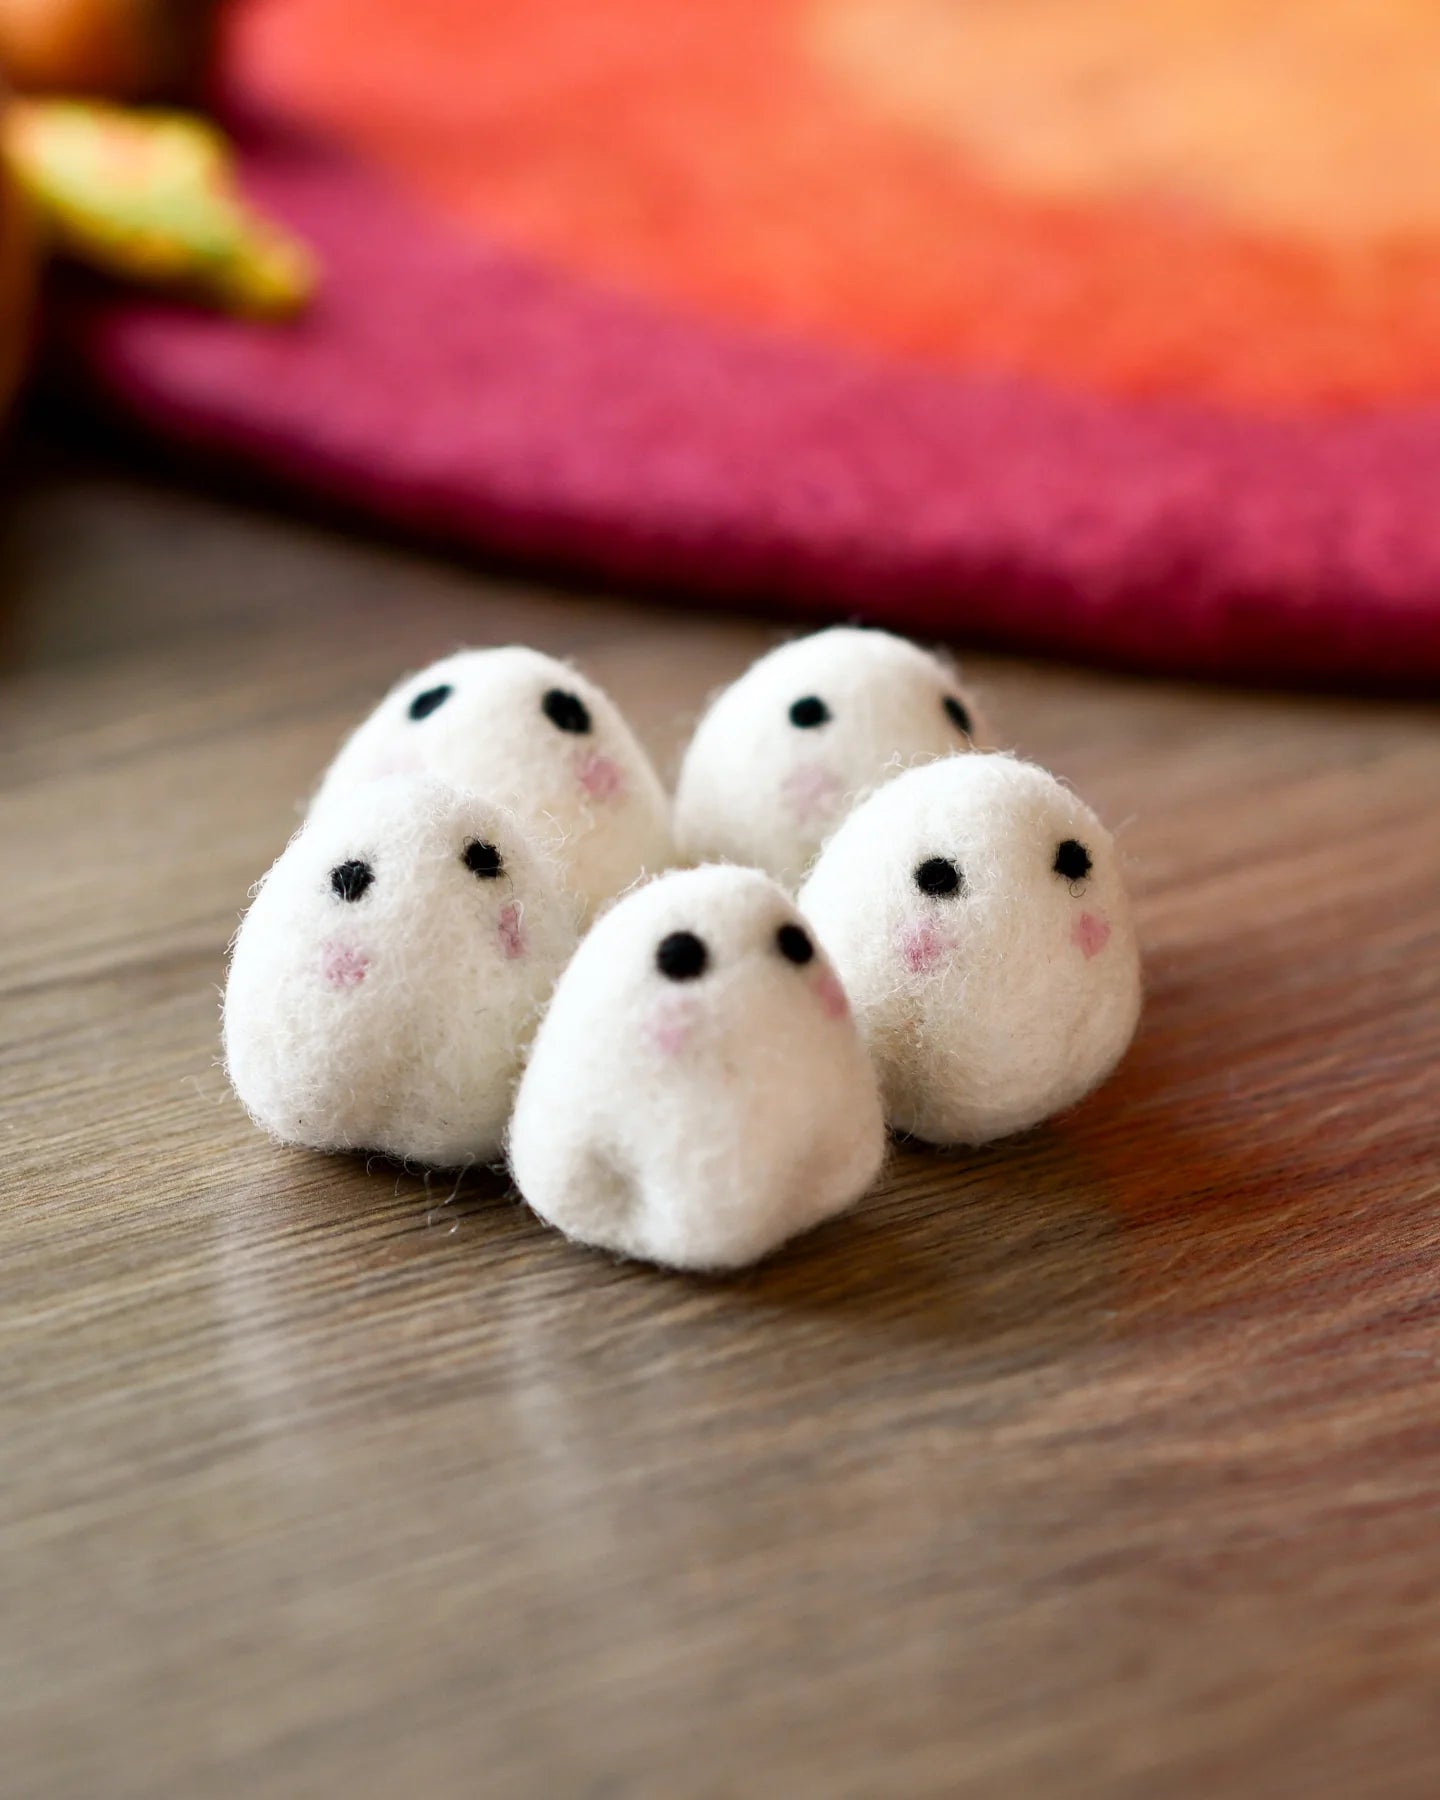 Felt Cute Ghosts Loose Parts - 5 Ghosts